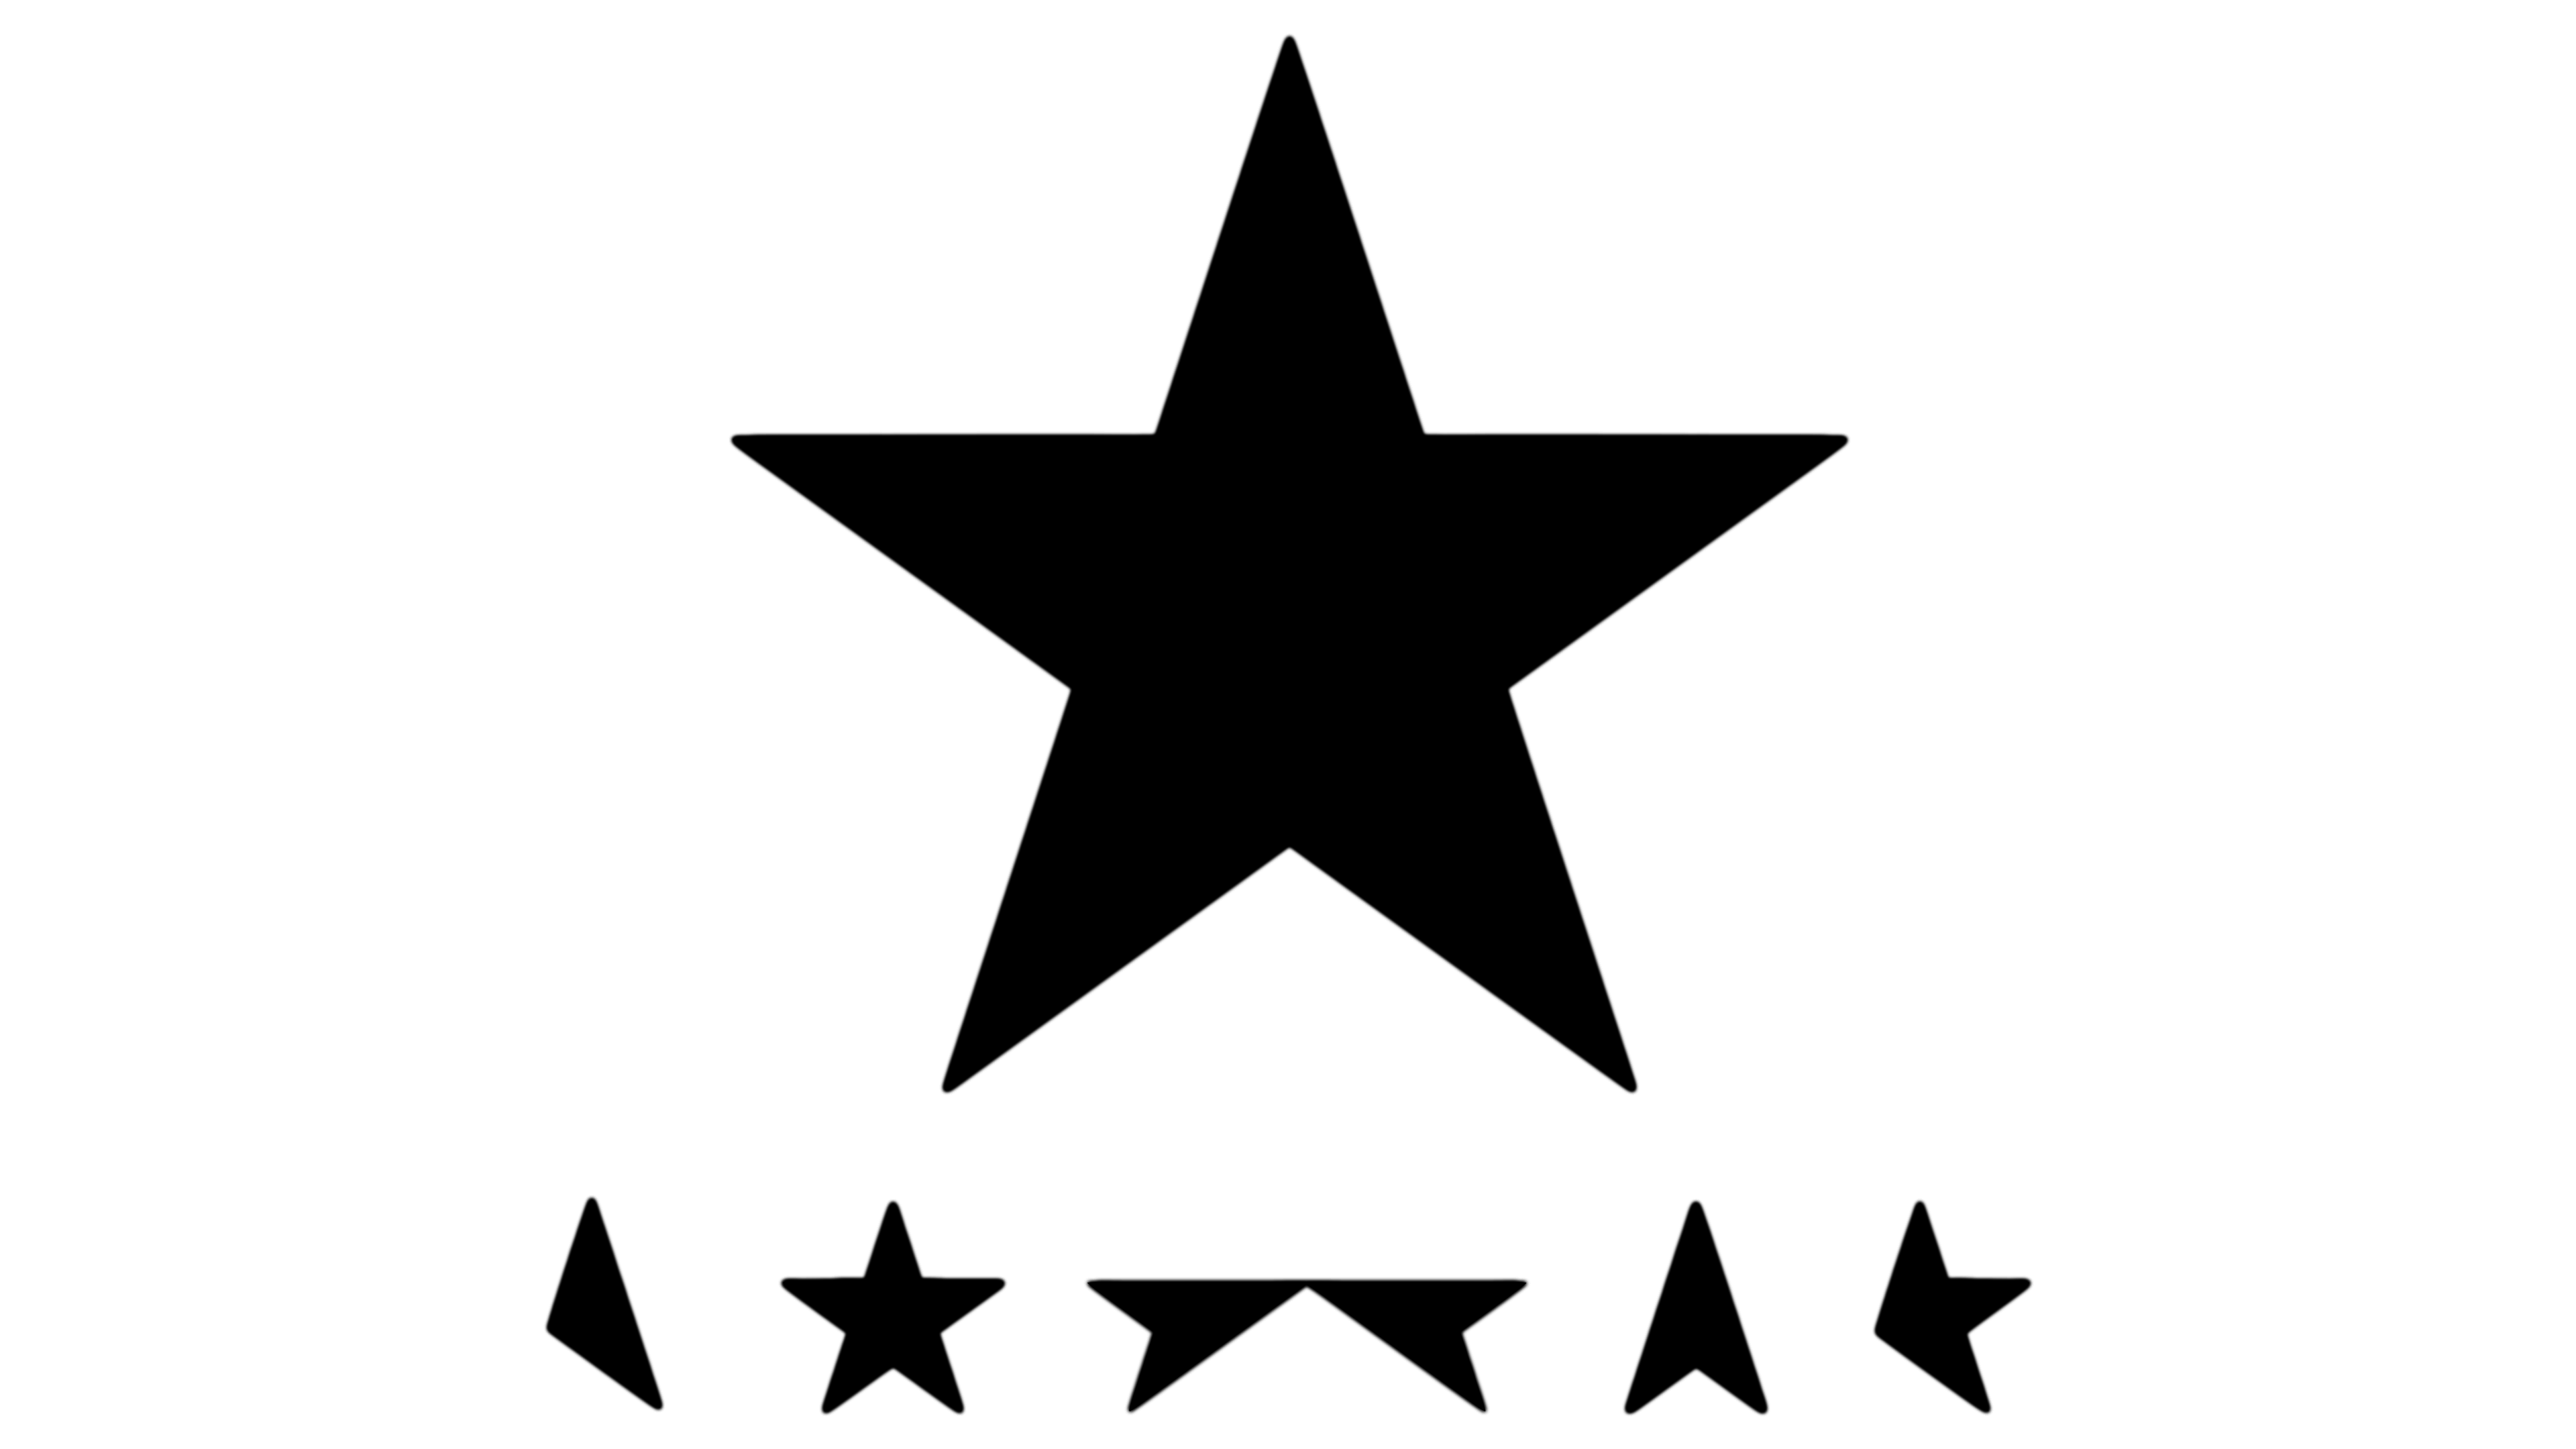 General 3840x2160 David Bowie monochrome music album covers simple background white background minimalism